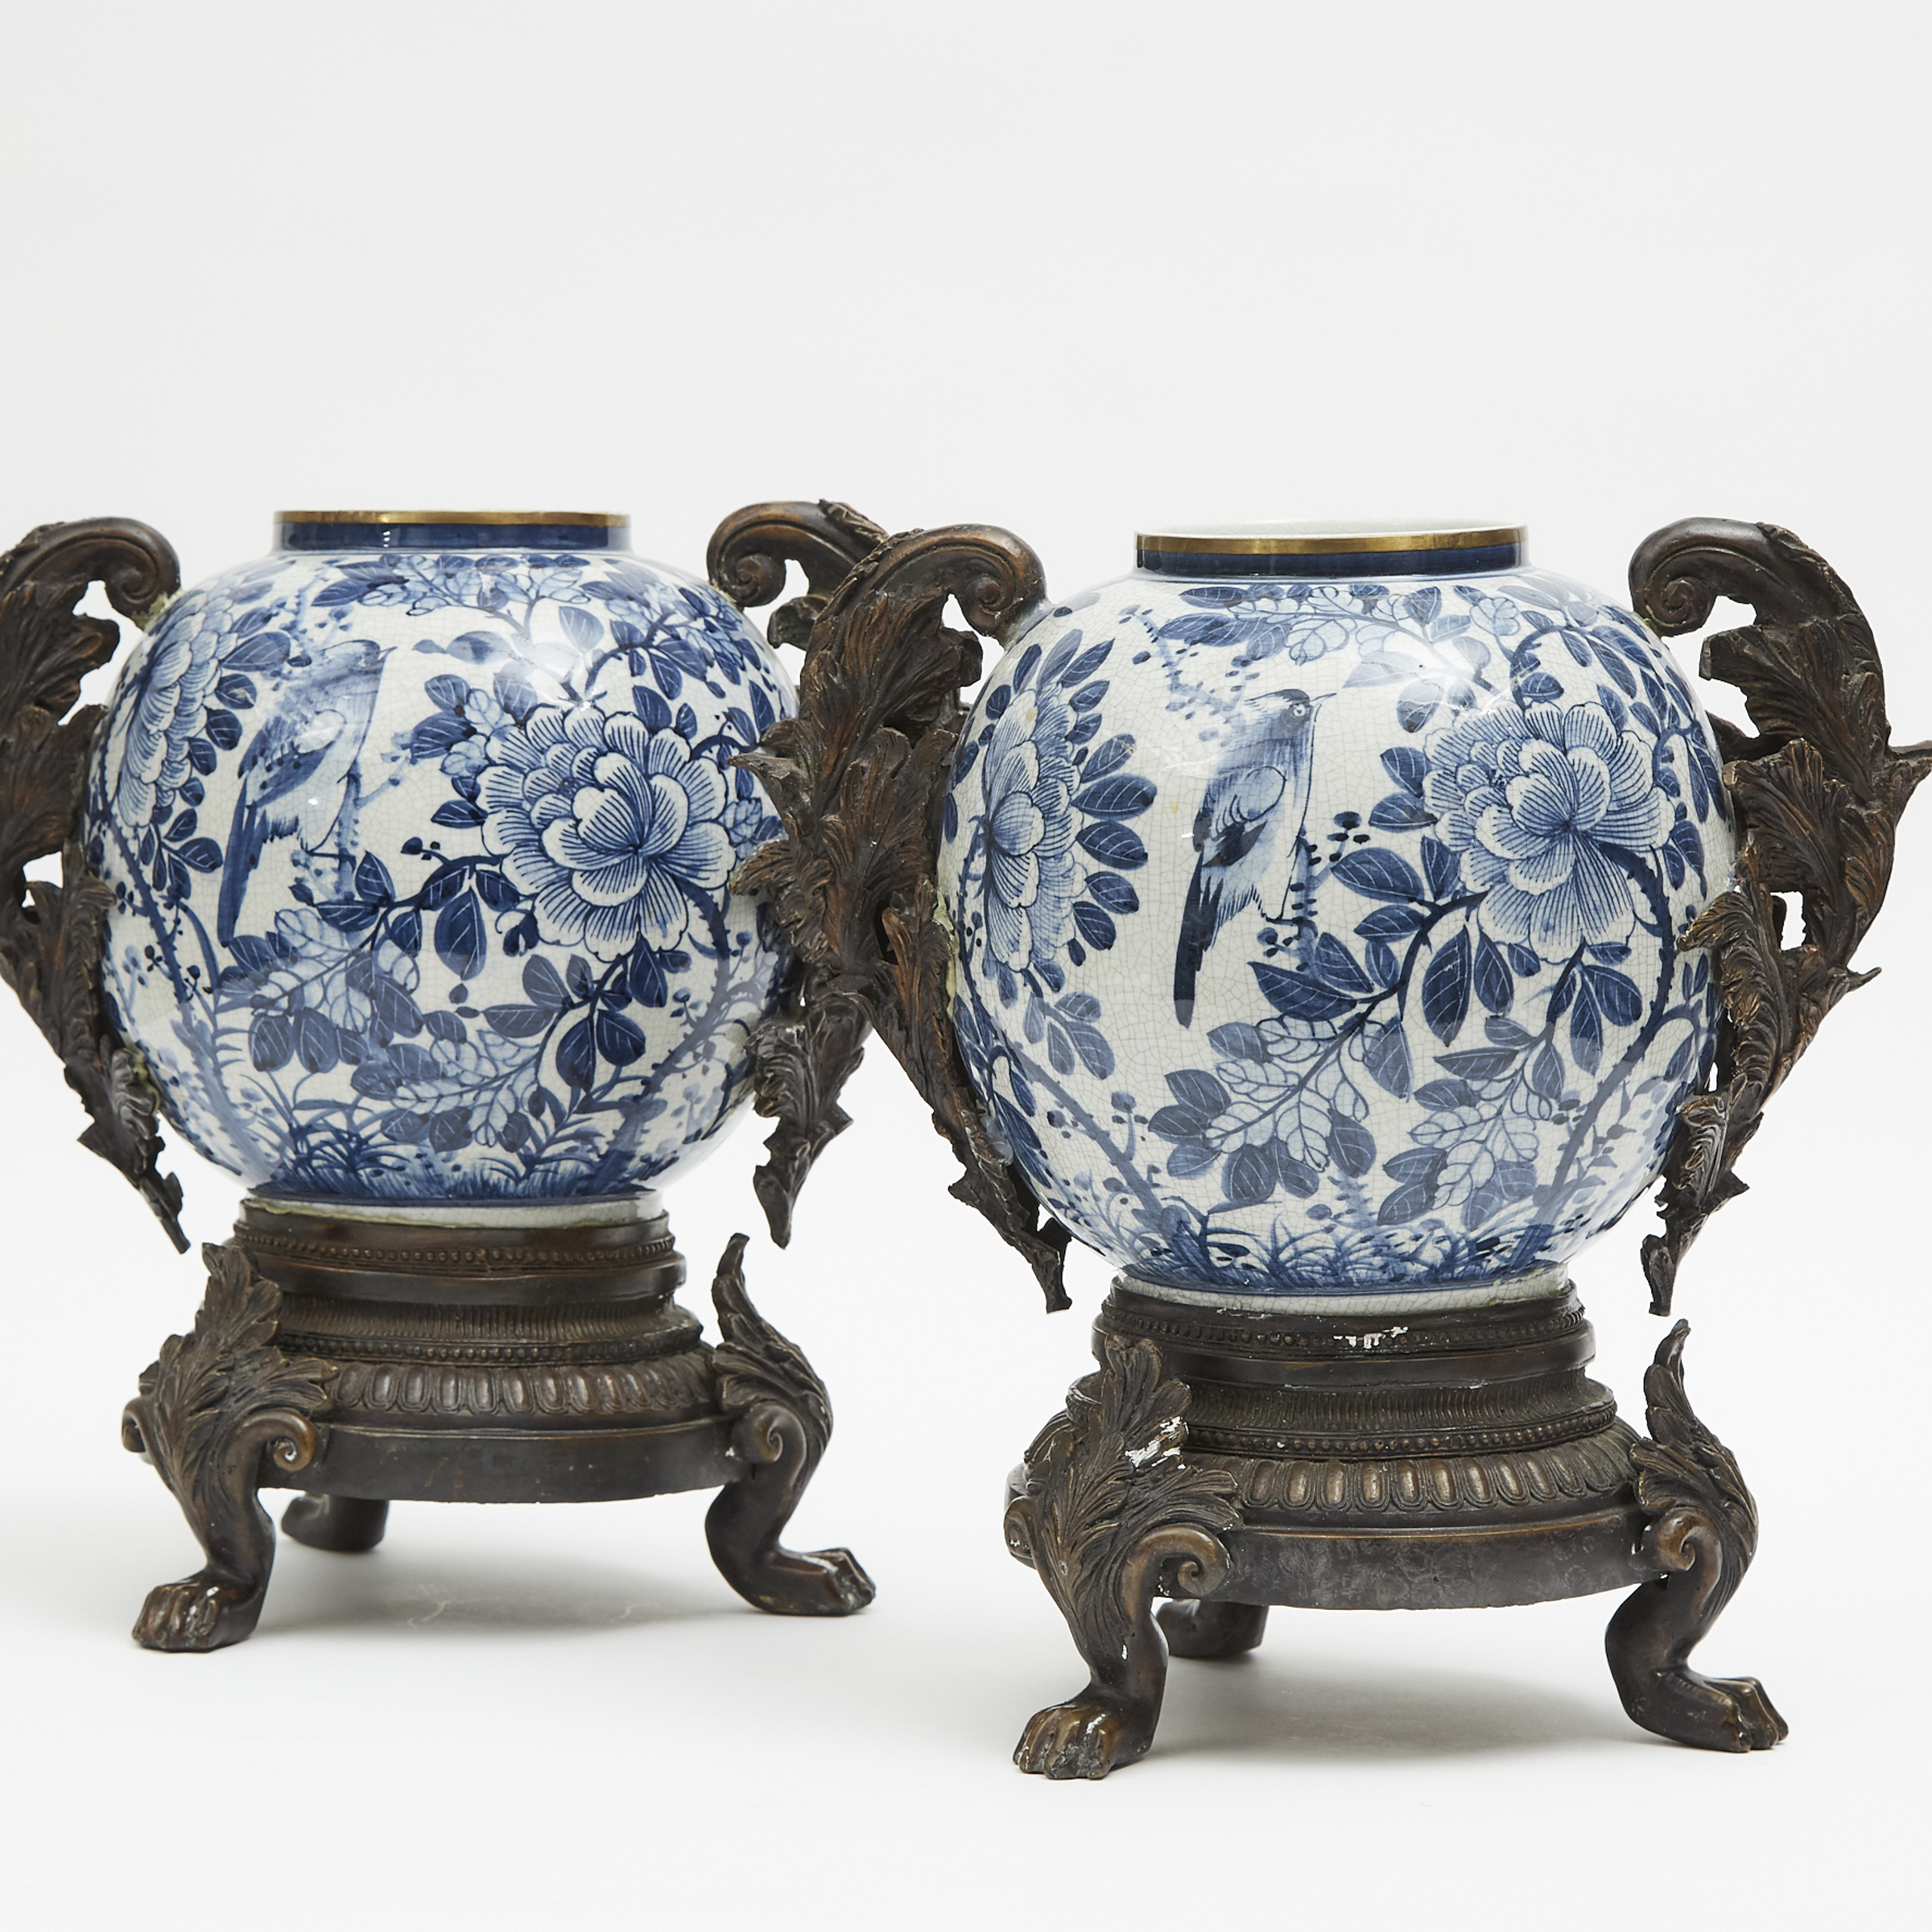 A Pair of Bronze Mounted Blue and White Vases